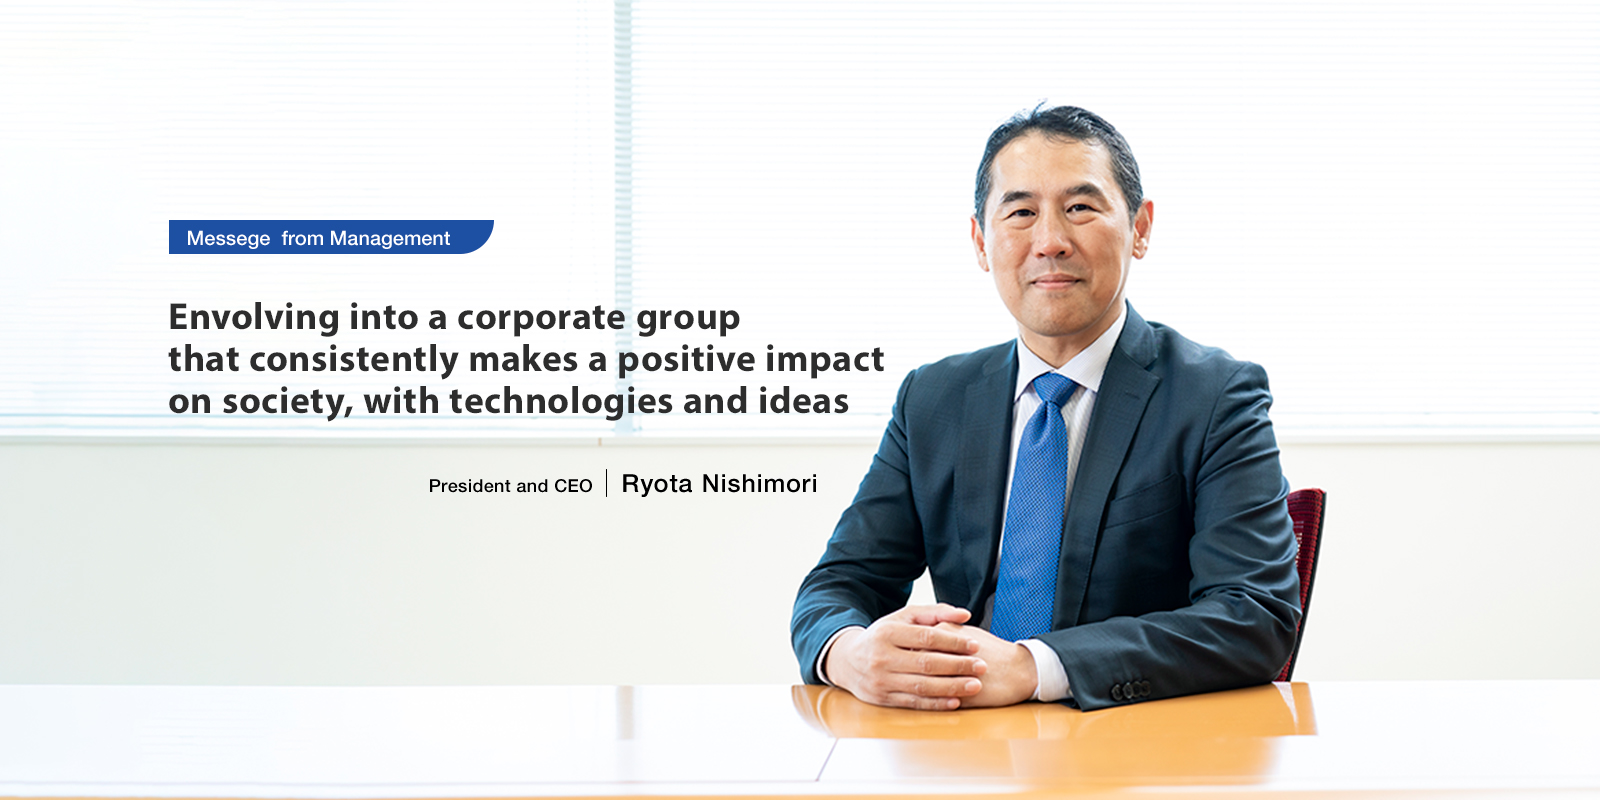 Messege from Management Envolving into a corporate group that consistently makes a positive impact on society, with technologies and ideas. President and CEO Ryota Nishimori